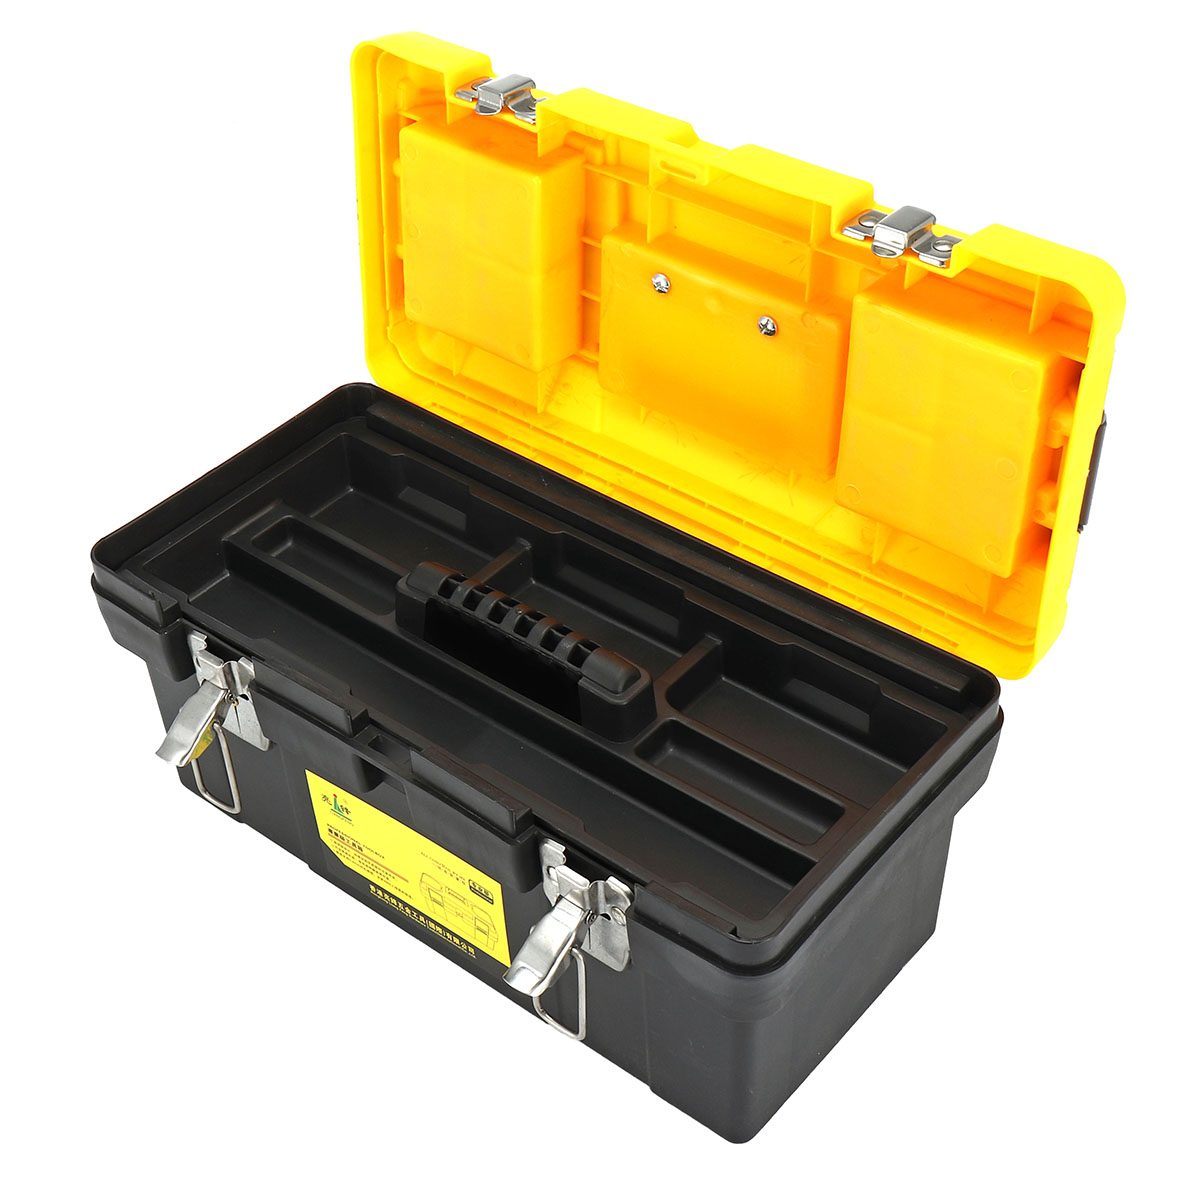 141719-Inch-Plastic-Work-Tools-Storage-Box-Protable-Carrying-Case-Handle-Accessories-Holder-1321332-10